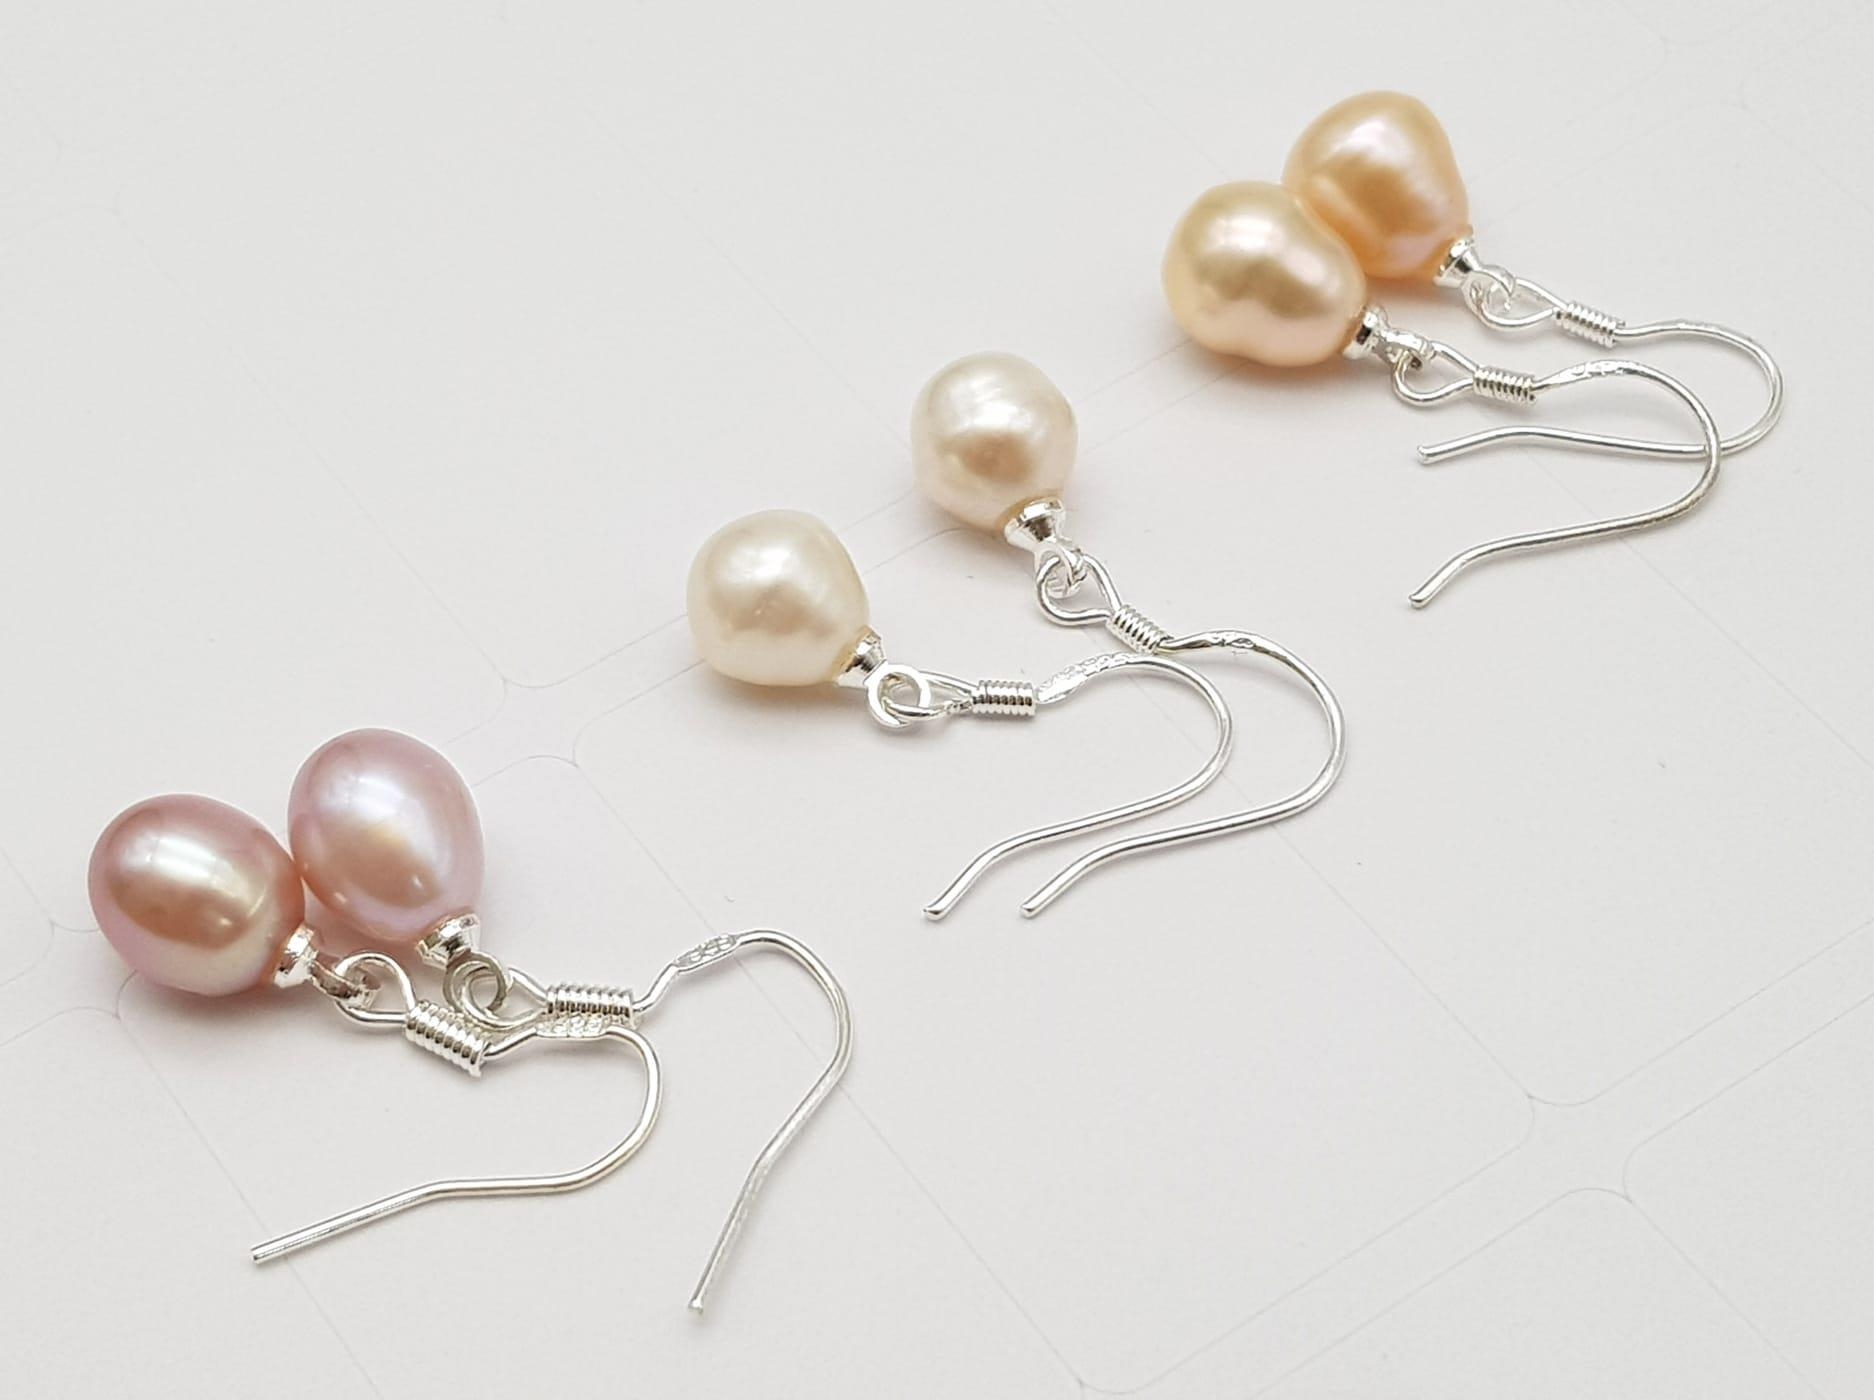 Three Pairs of Freshwater Pastel Shade Earrings. Set in 925 silver. - Image 2 of 7